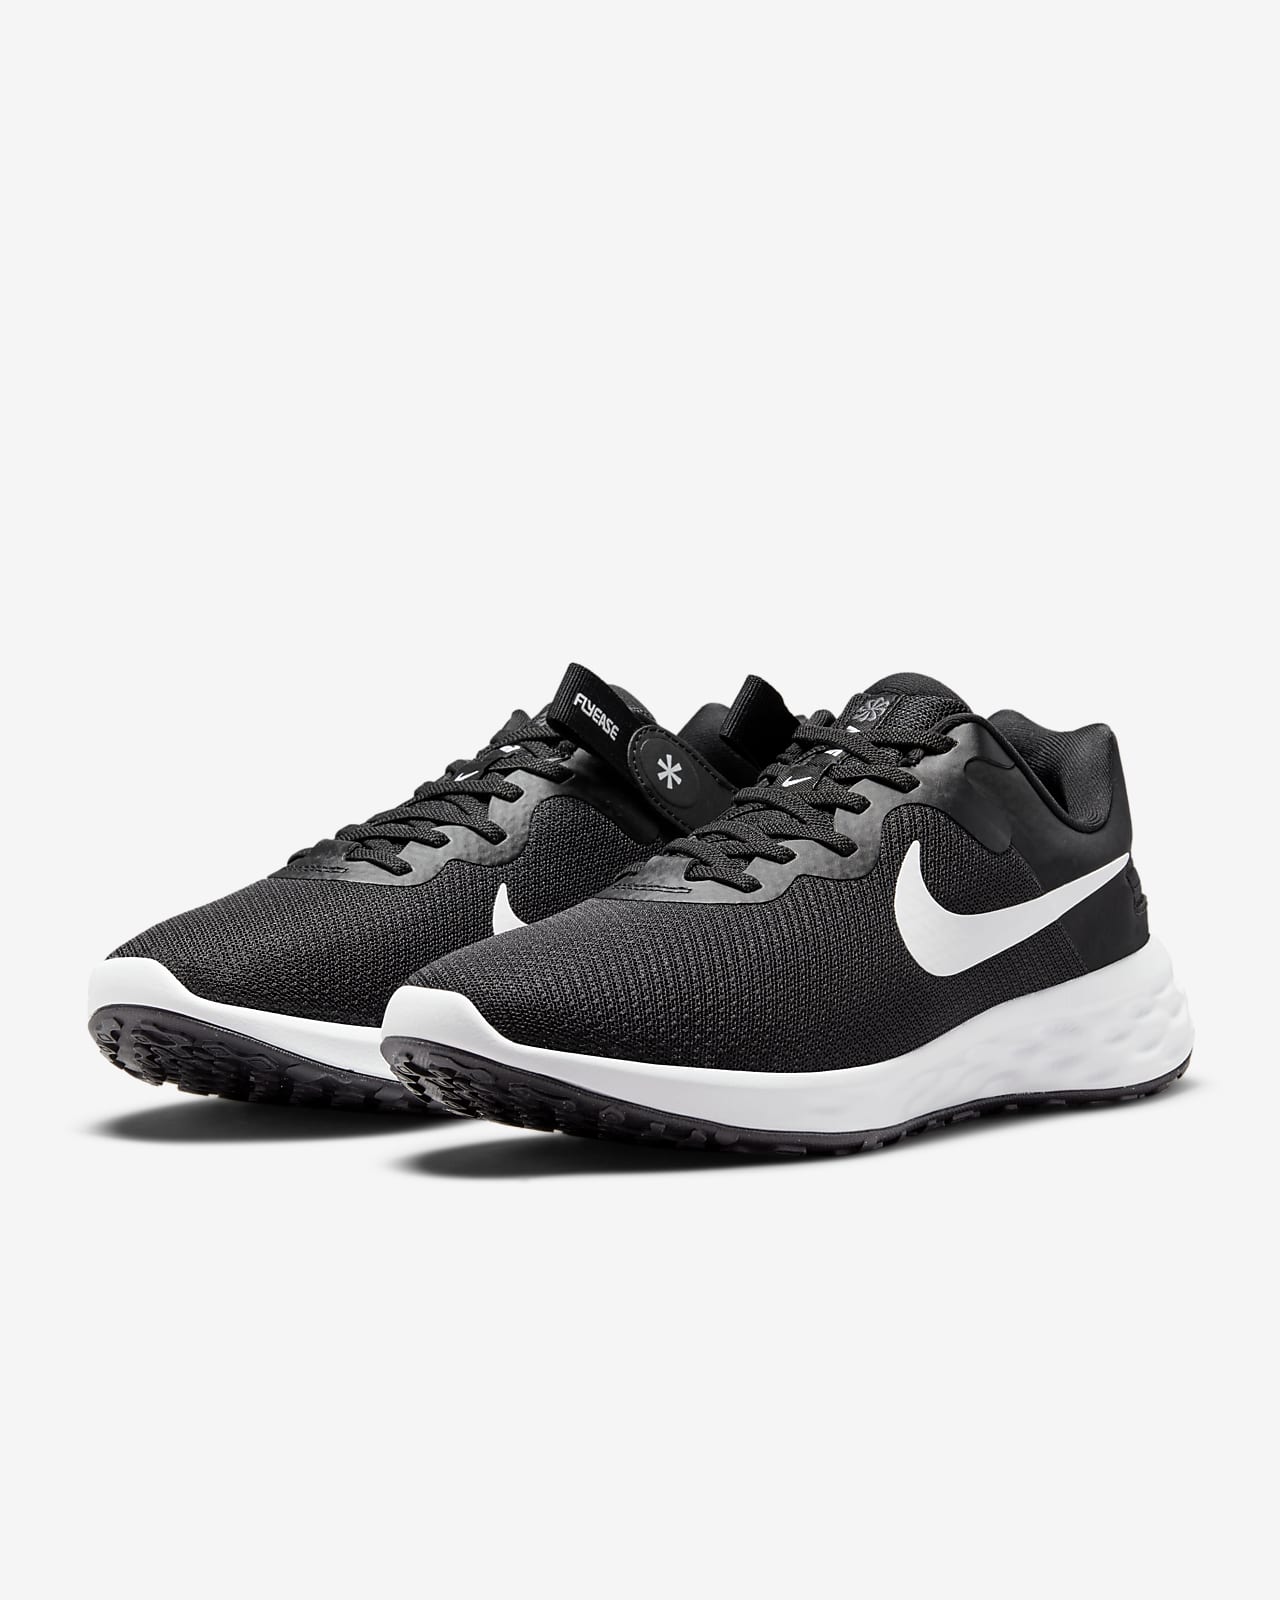 6 Nike Revolution Men\'s Shoes. Easy Nike Running On/Off CA FlyEase Road